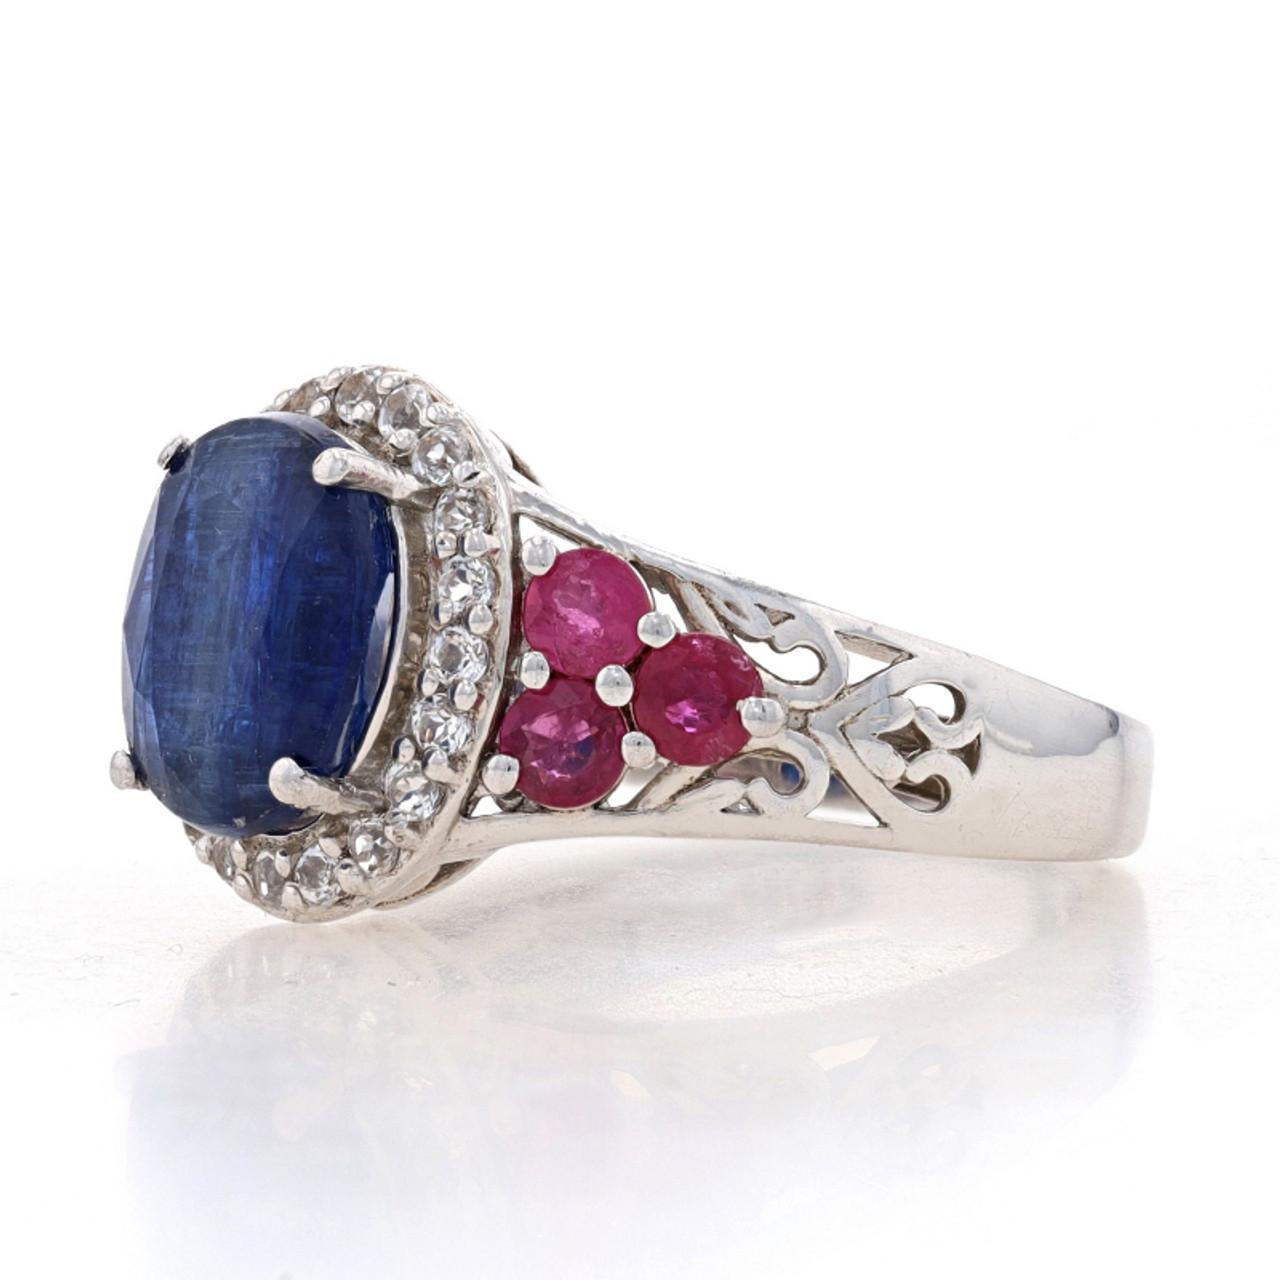 Round Cut Sterling Silver Kyanite, Ruby, & White Topaz Halo Ring 925 Oval Cut